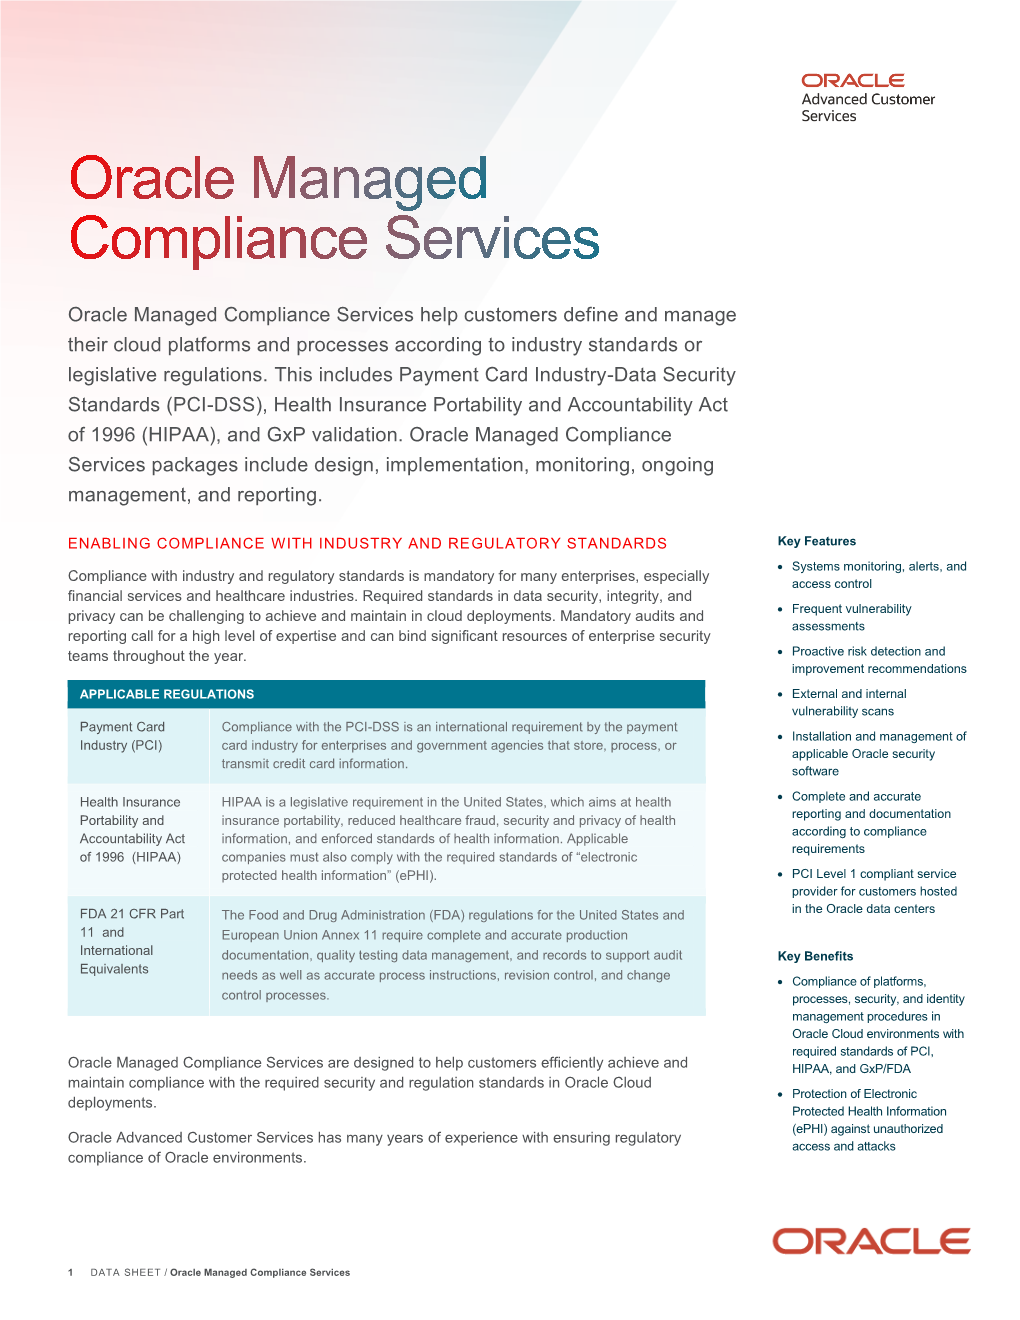 Oracle Managed Compliance Services Help Customers Define and Manage Their Cloud Platforms and Processes According to Industry Standards Or Legislative Regulations